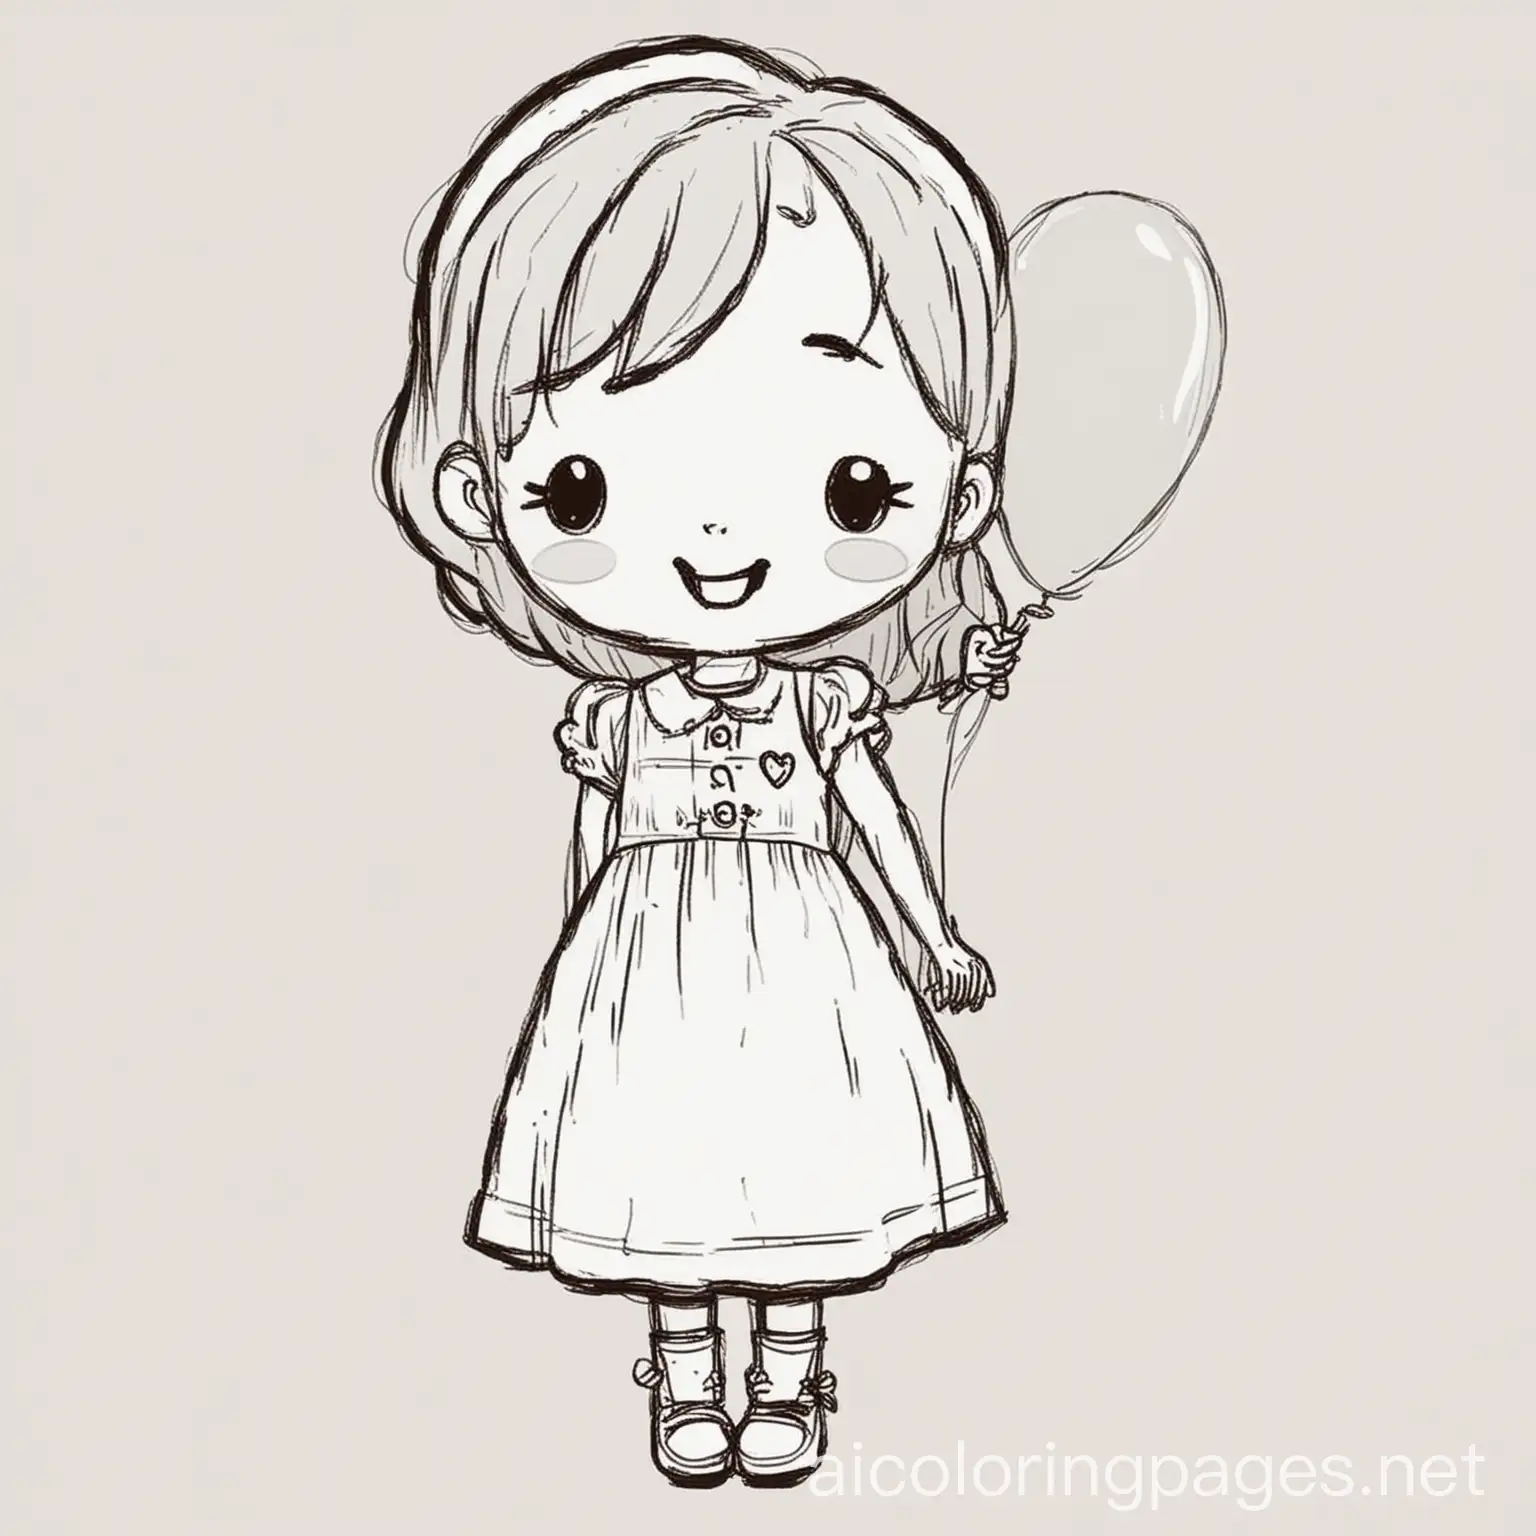 Cheerful-Girl-Holding-Heart-Balloon-Adorable-young-girl-with-a-heartshaped-balloon-radiating-joy-in-a-simple-dress